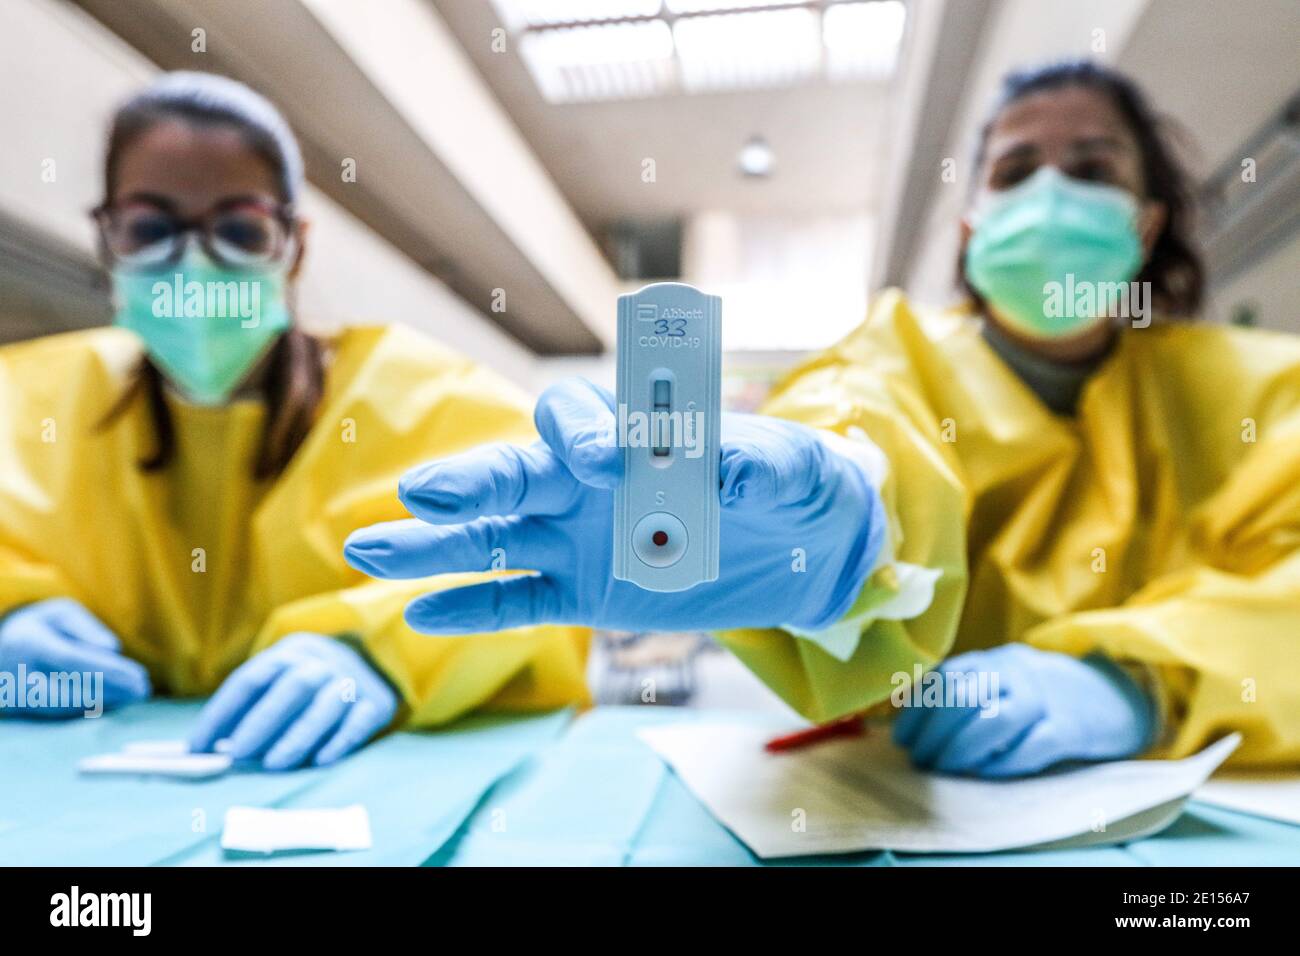 January 4, 2021: January 4, 2020 (Malaga) More than 20,000 education professionals in Malaga, both teachers and administrative staff, social integration technicians, sign interpreters or monitors have been summoned for the Covid-19 rapid tests Credit: Lorenzo Carnero/ZUMA Wire/Alamy Live News Stock Photo